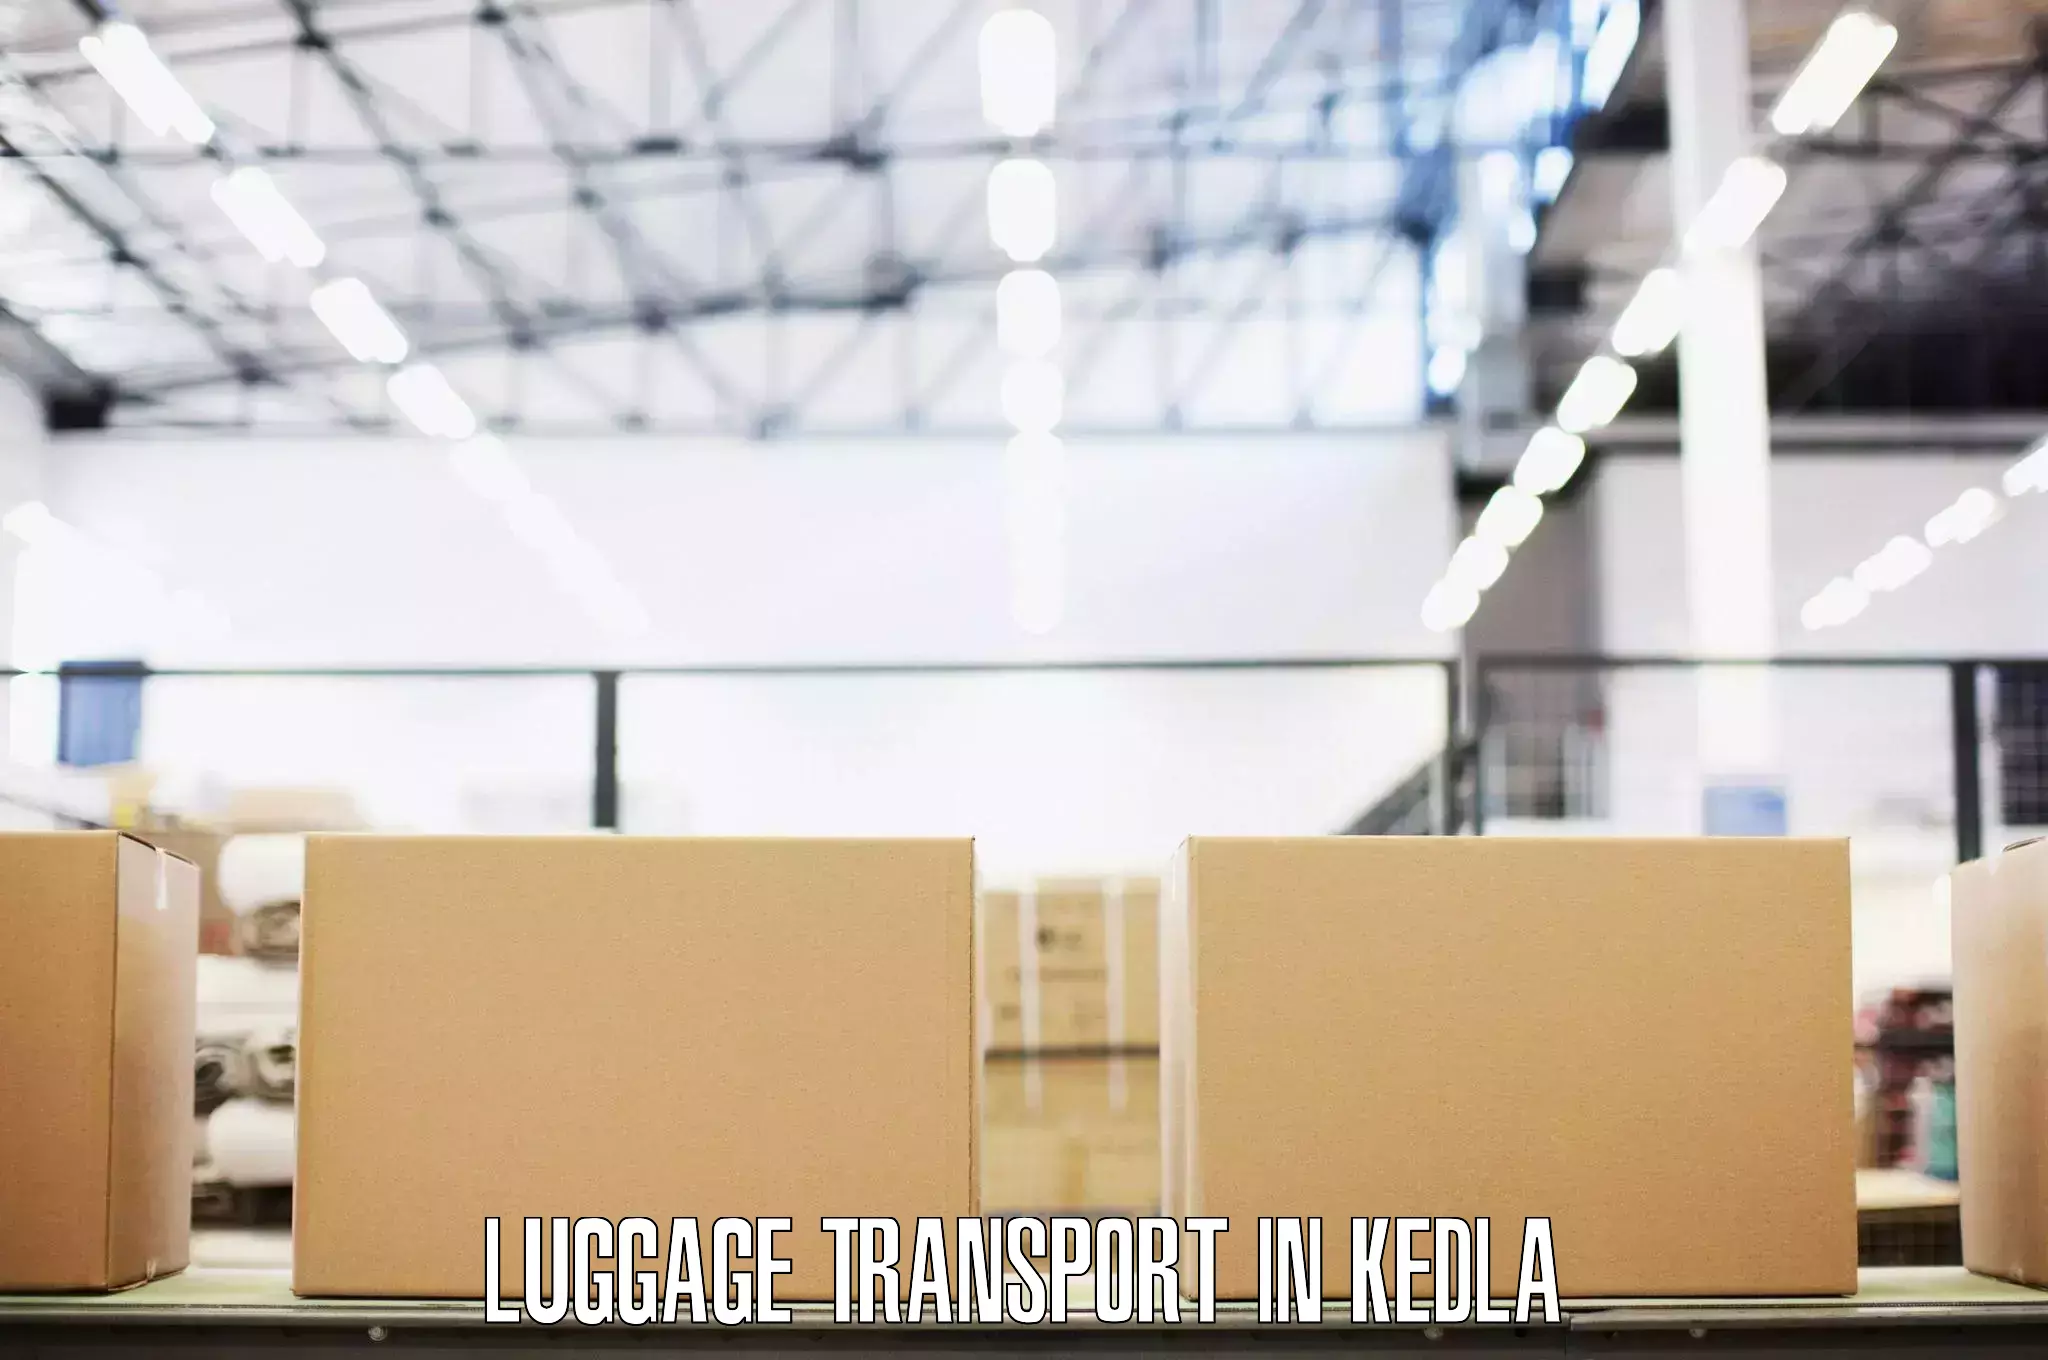 Doorstep luggage collection in Kedla